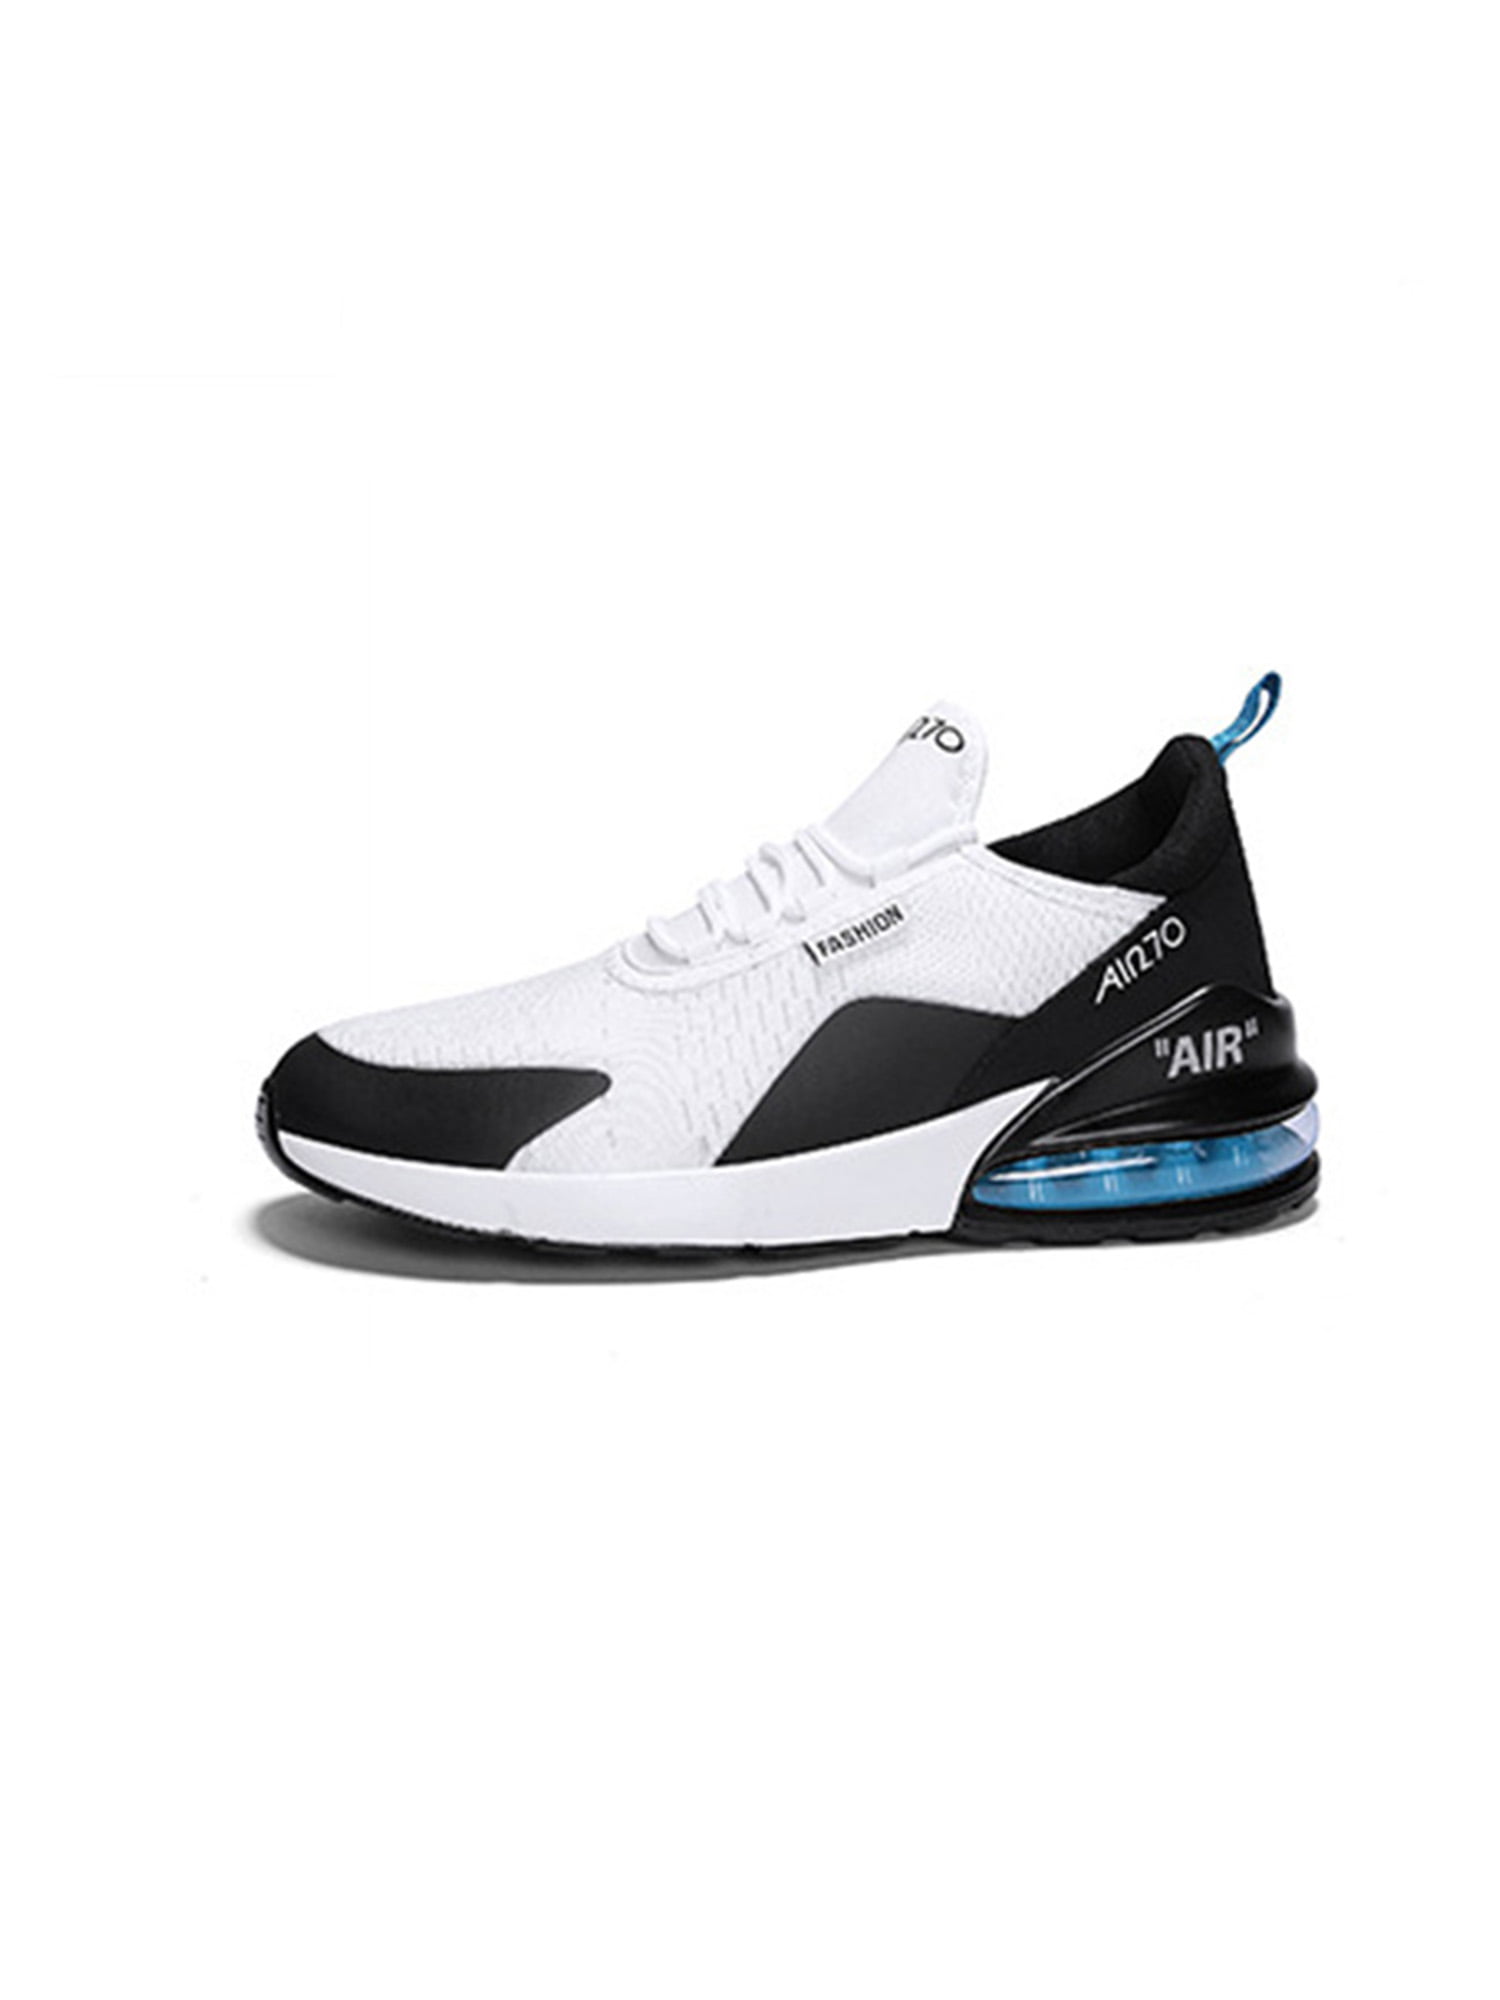 Details about   Mens Air Shock Absorbing Casual Running Walking Trainers Jogging Gym Shoes Size 